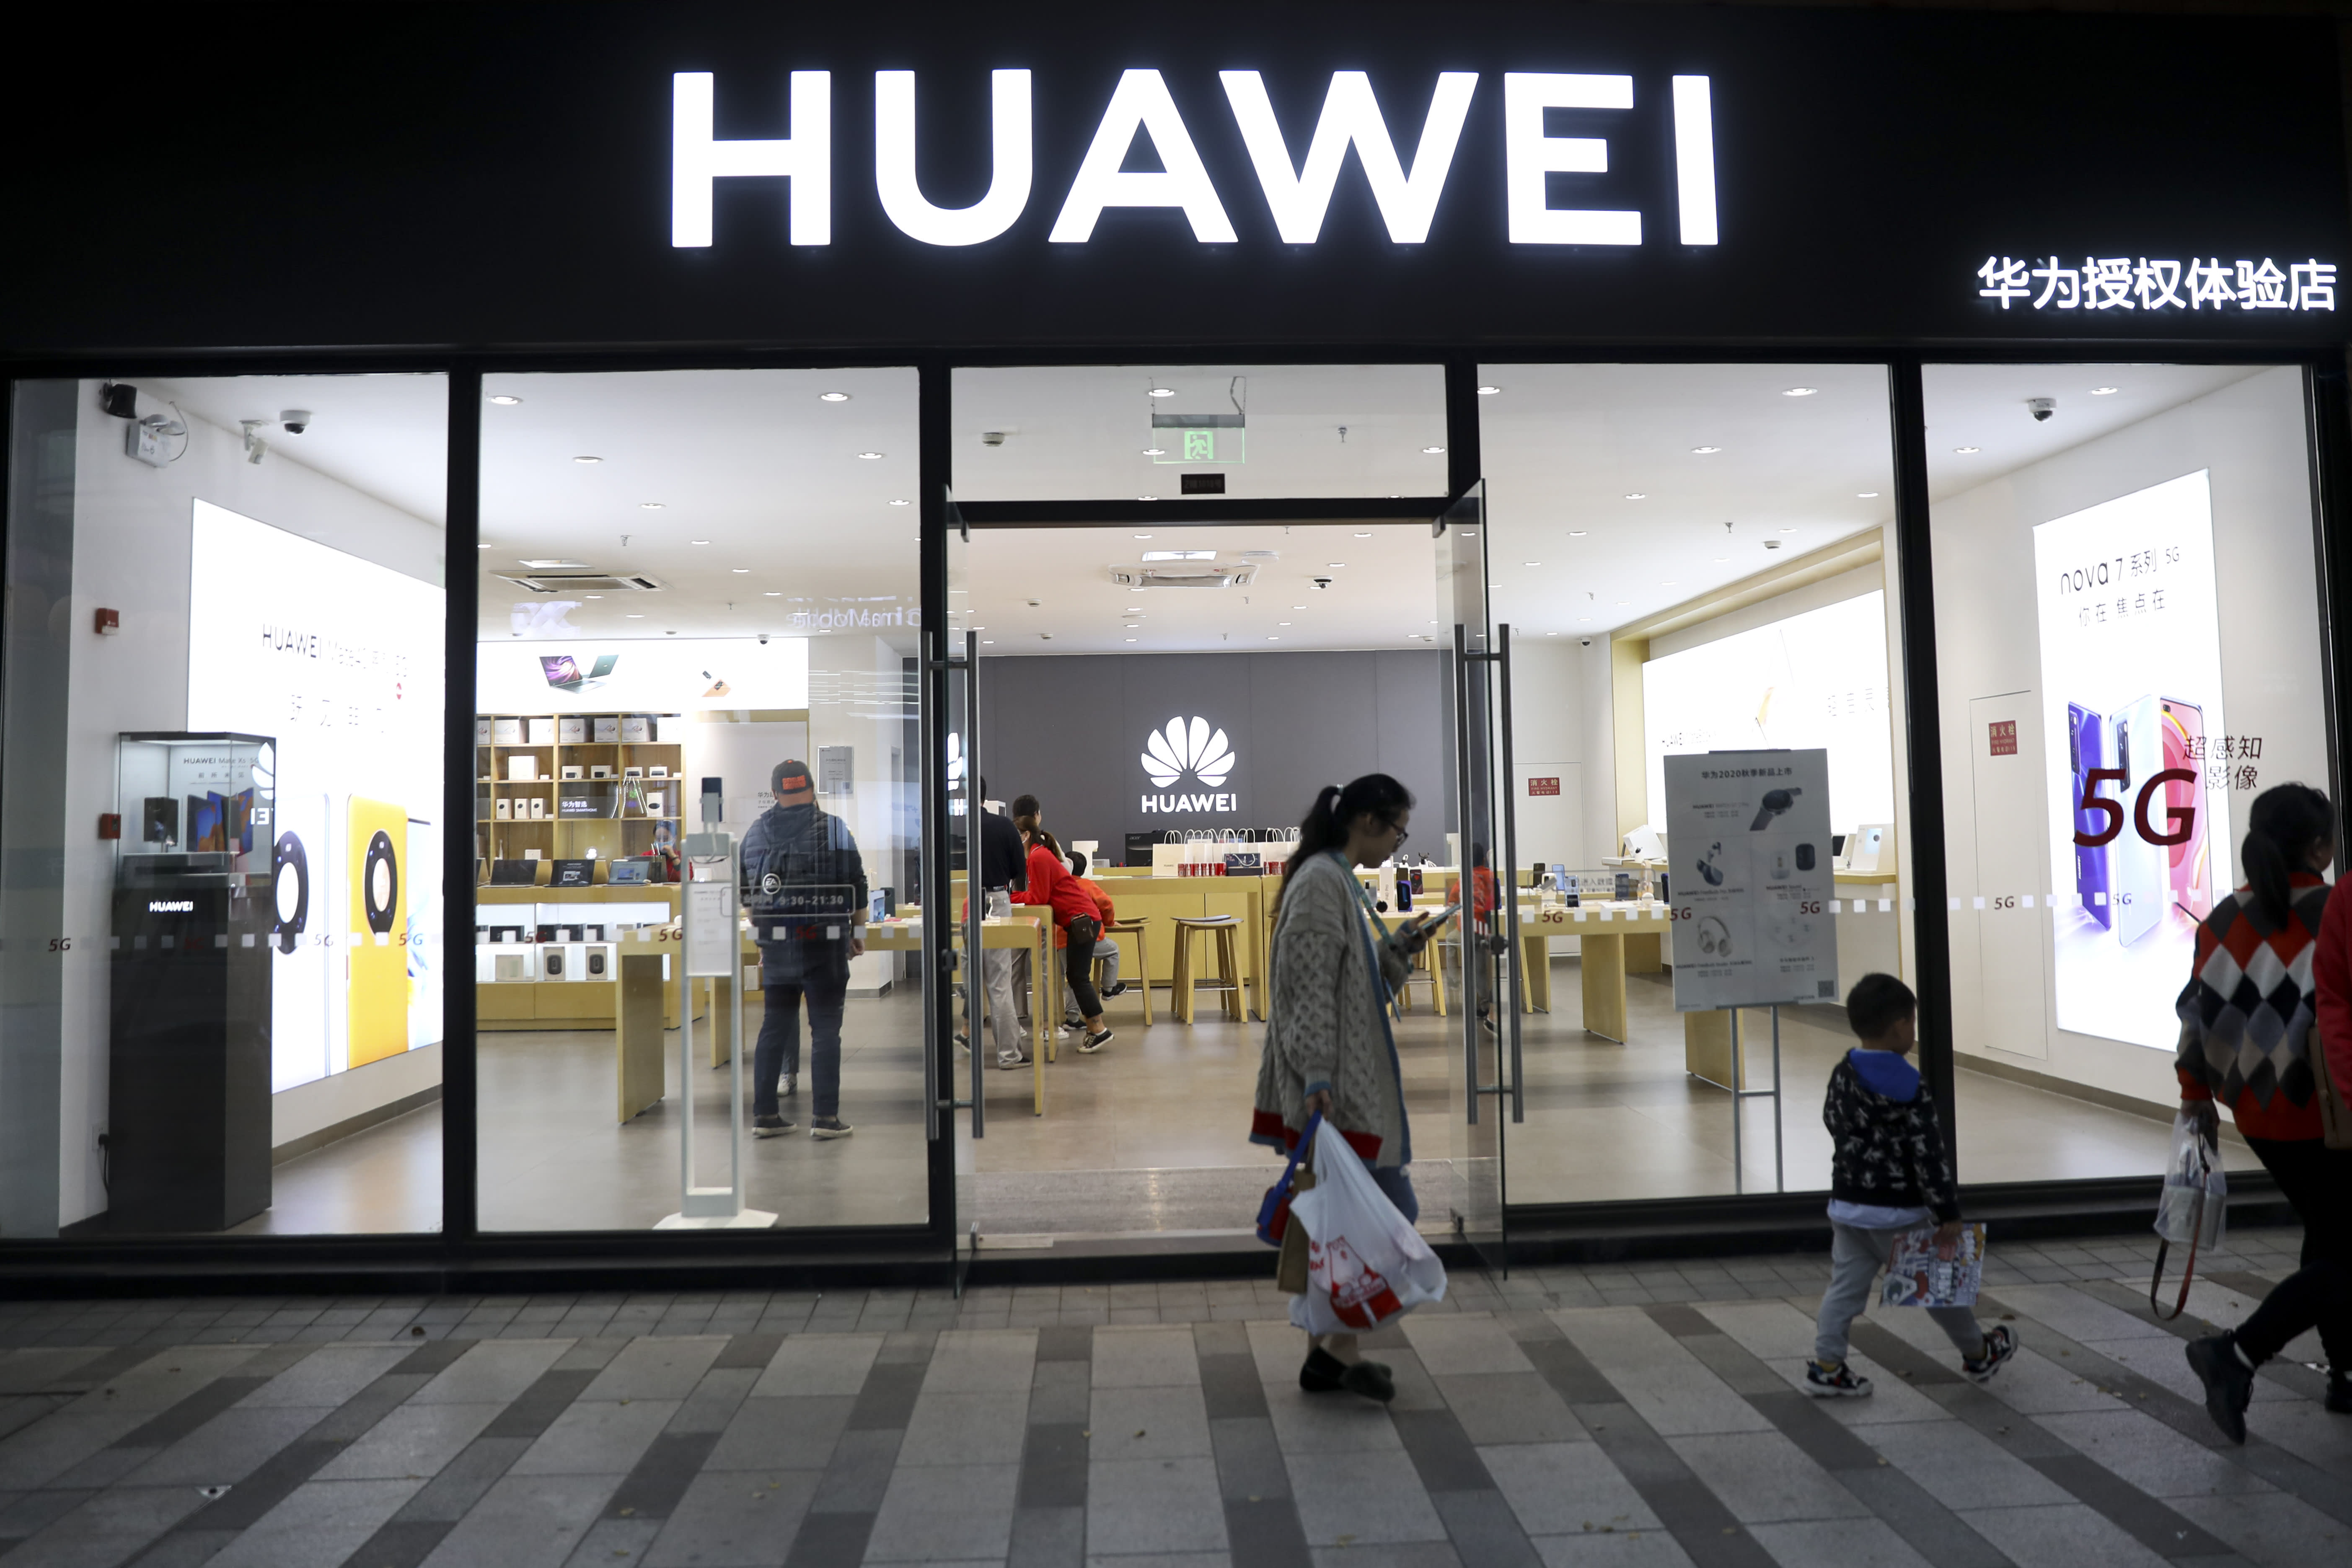 Huawei Q4 smartphone shipments plummet 41% with the impact of sanctions